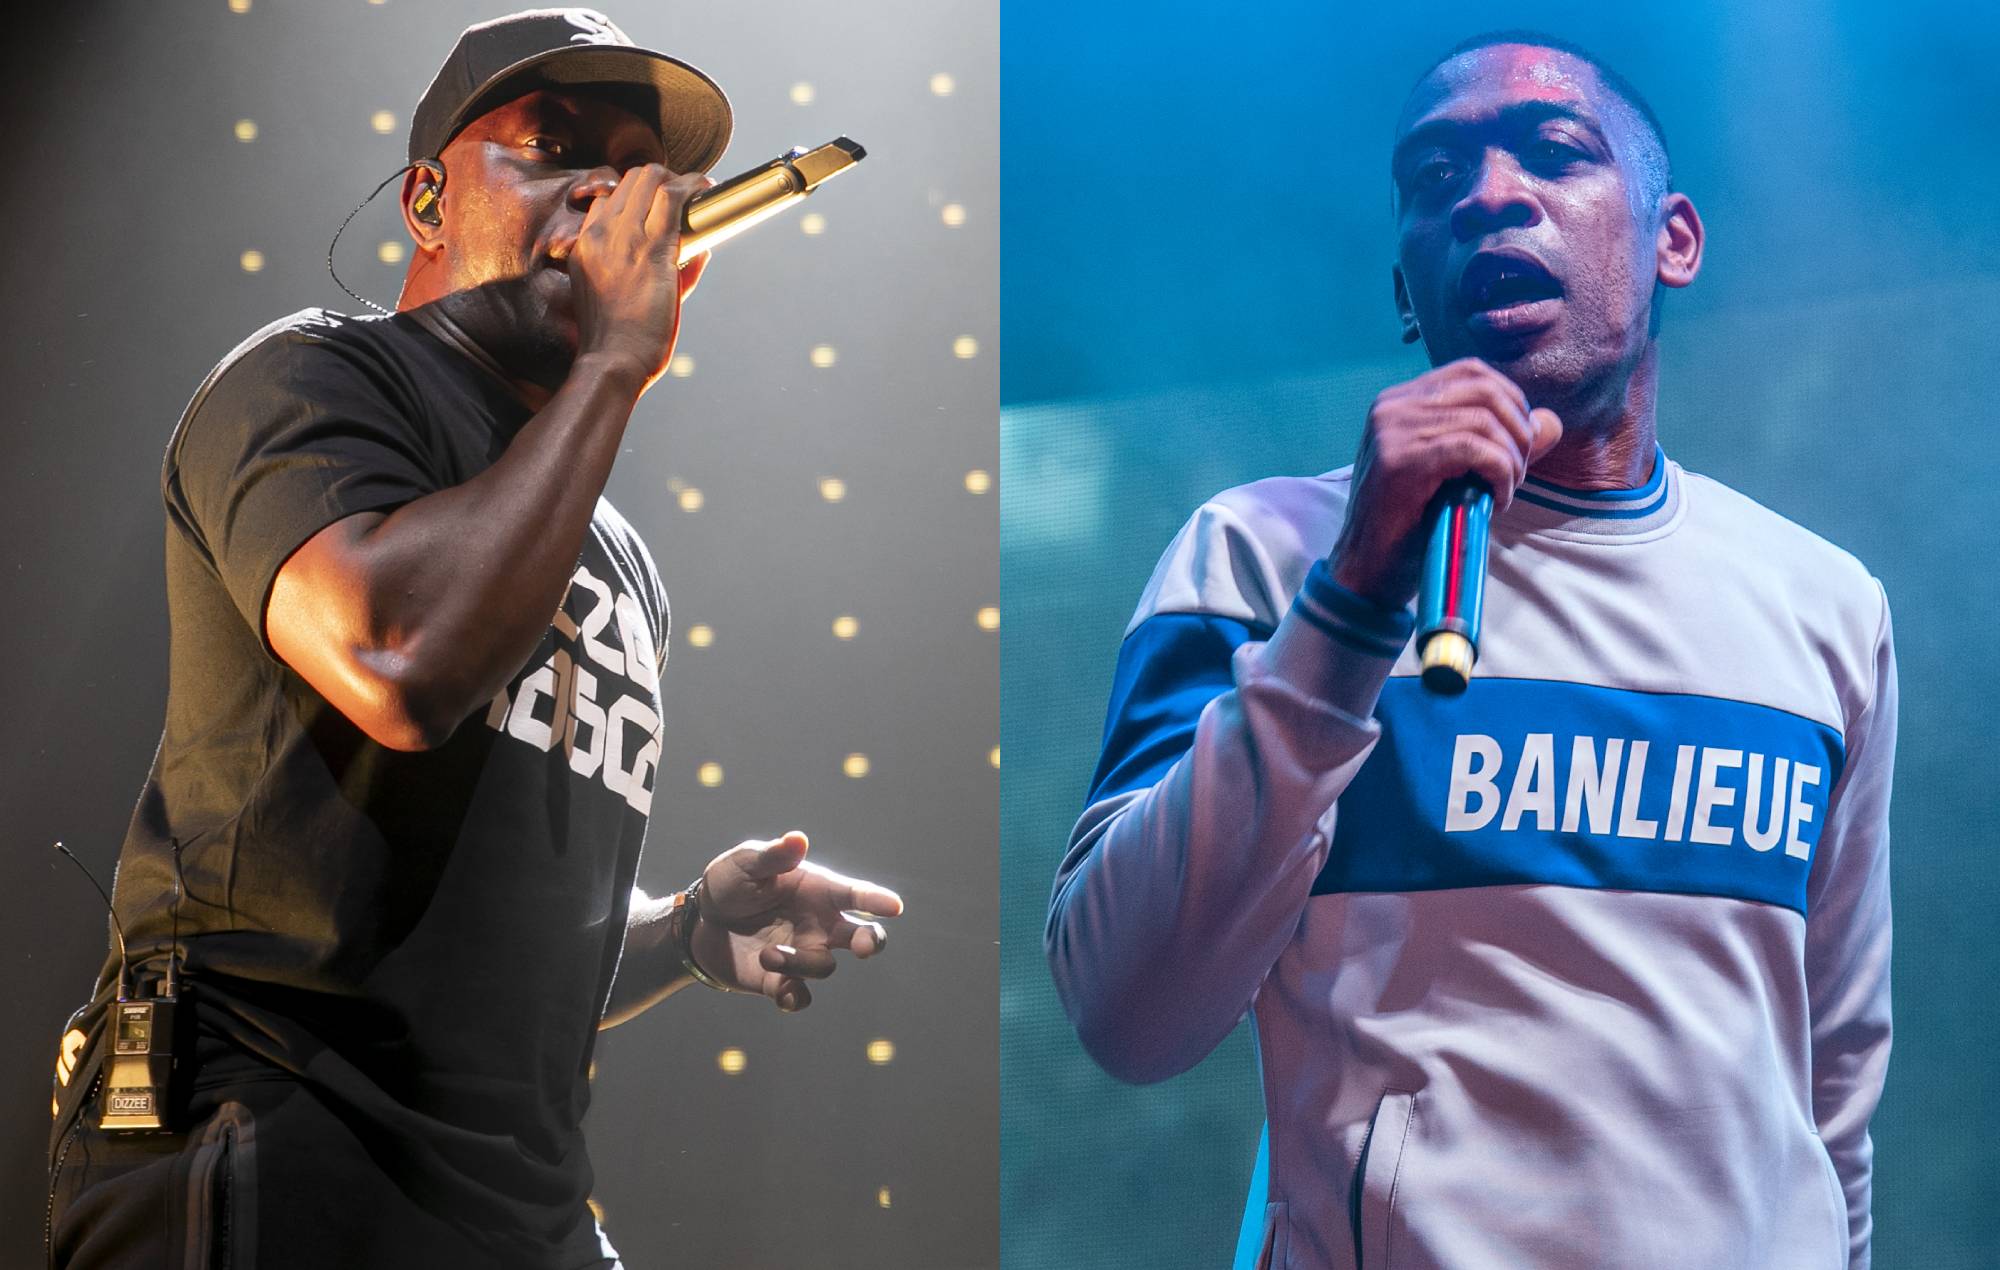 Dizzee Rascal and Wiley seemingly end feud after appearing onstage together in Dubai